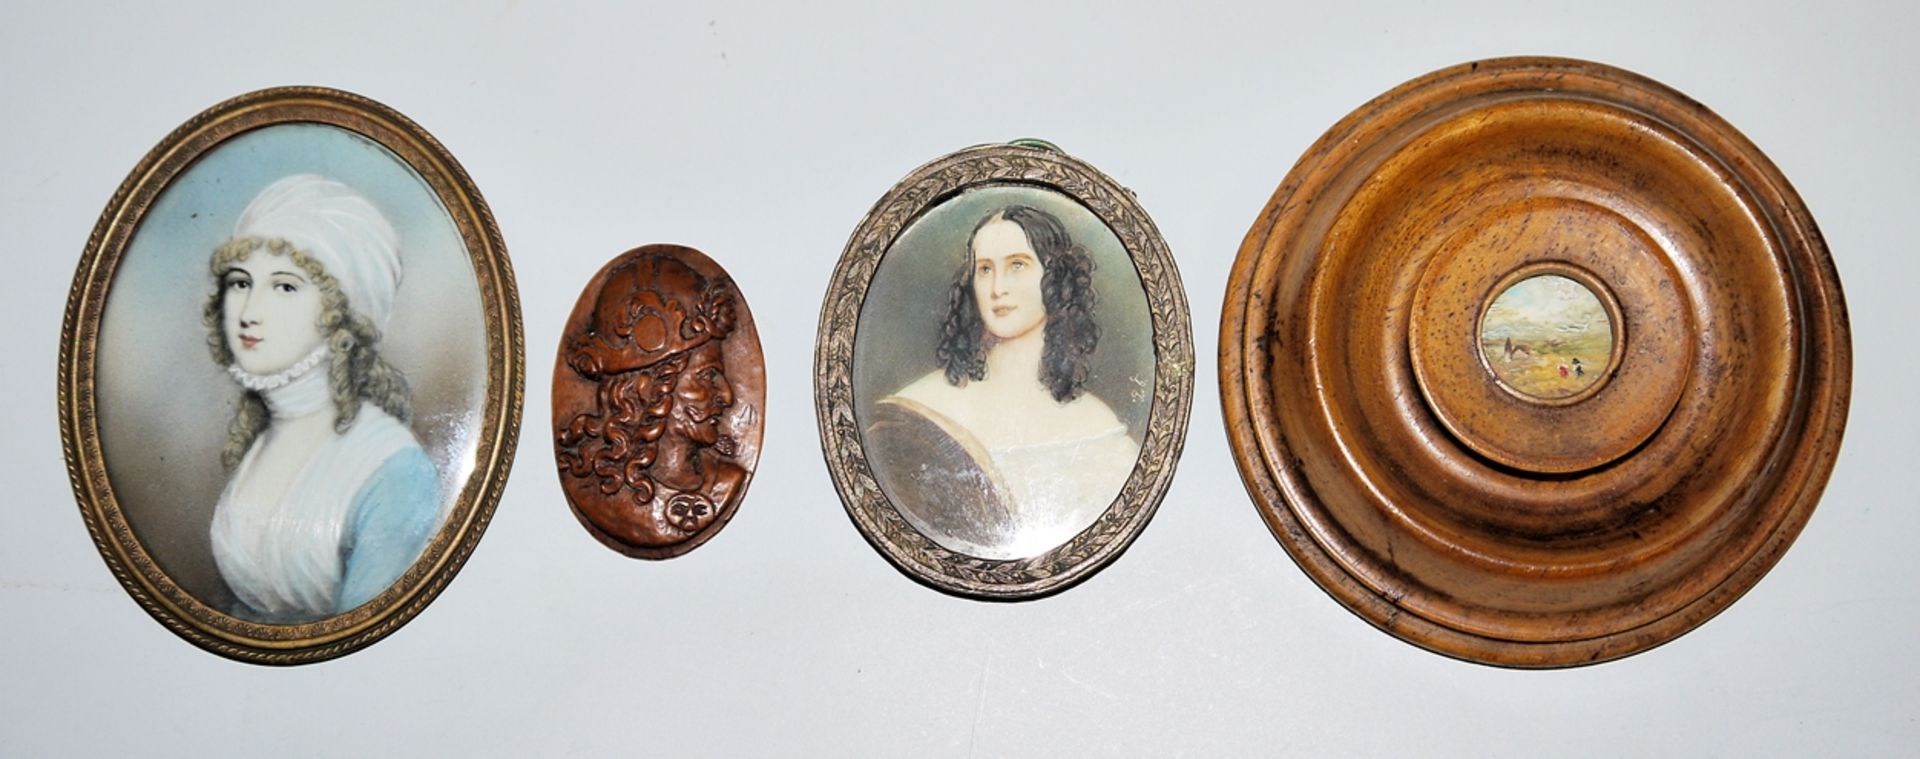 Collection estate with 12 miniatures from ca. 1800 - Image 2 of 4